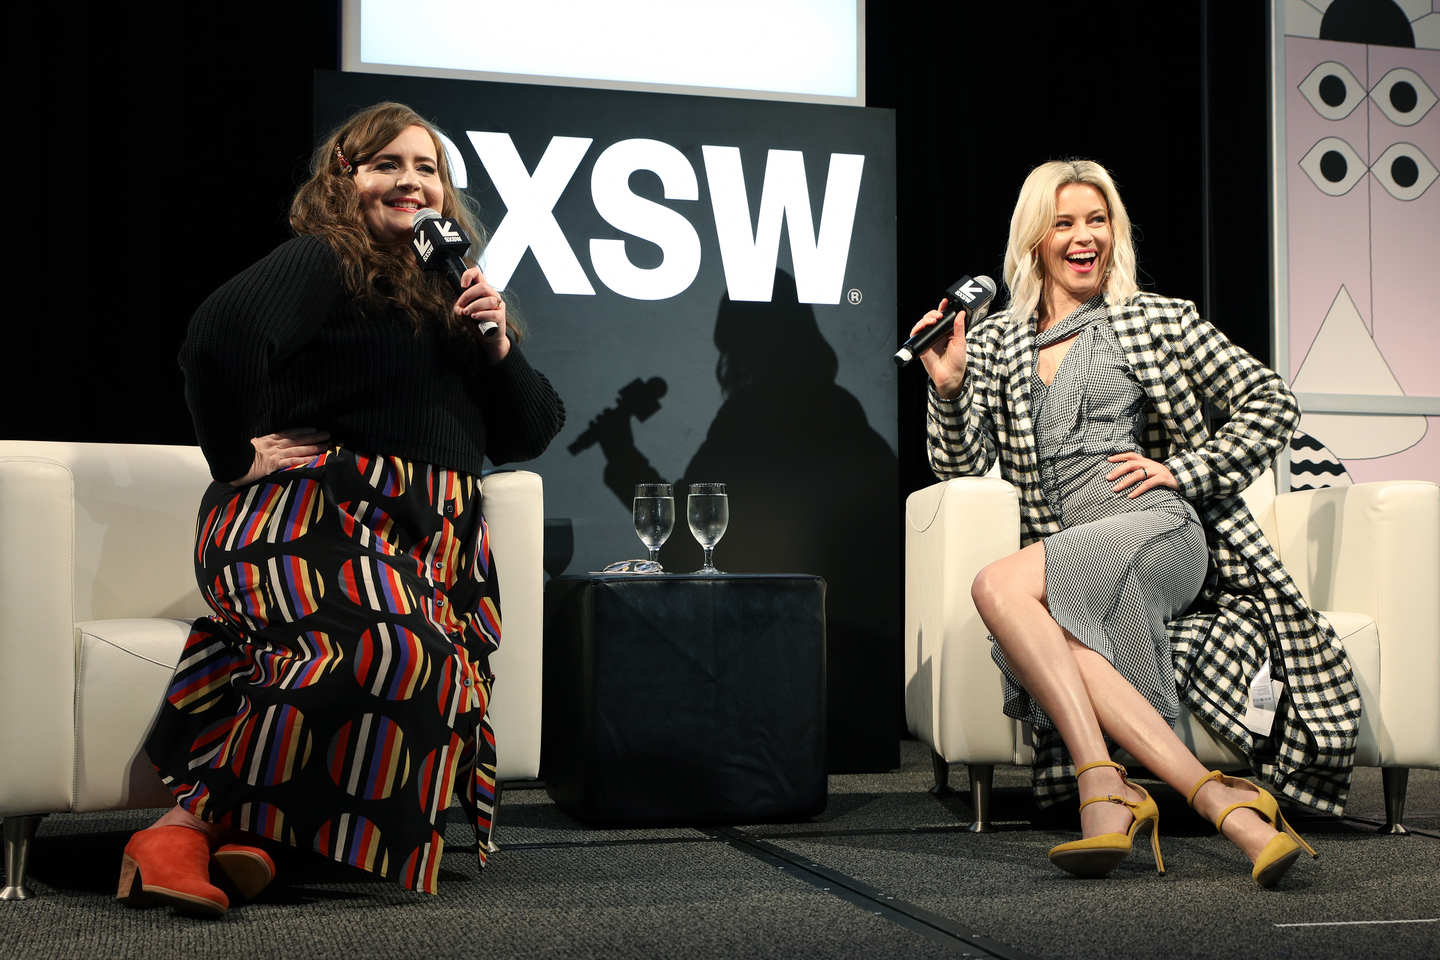 (L-R) Aidy Bryant and Elizabeth Banks speak onstage at their Featured Session: Elizabeth Banks with Aidy Bryant, talking about their new show Shrill. Photo by Mike Jordan/Getty Images for SXSW